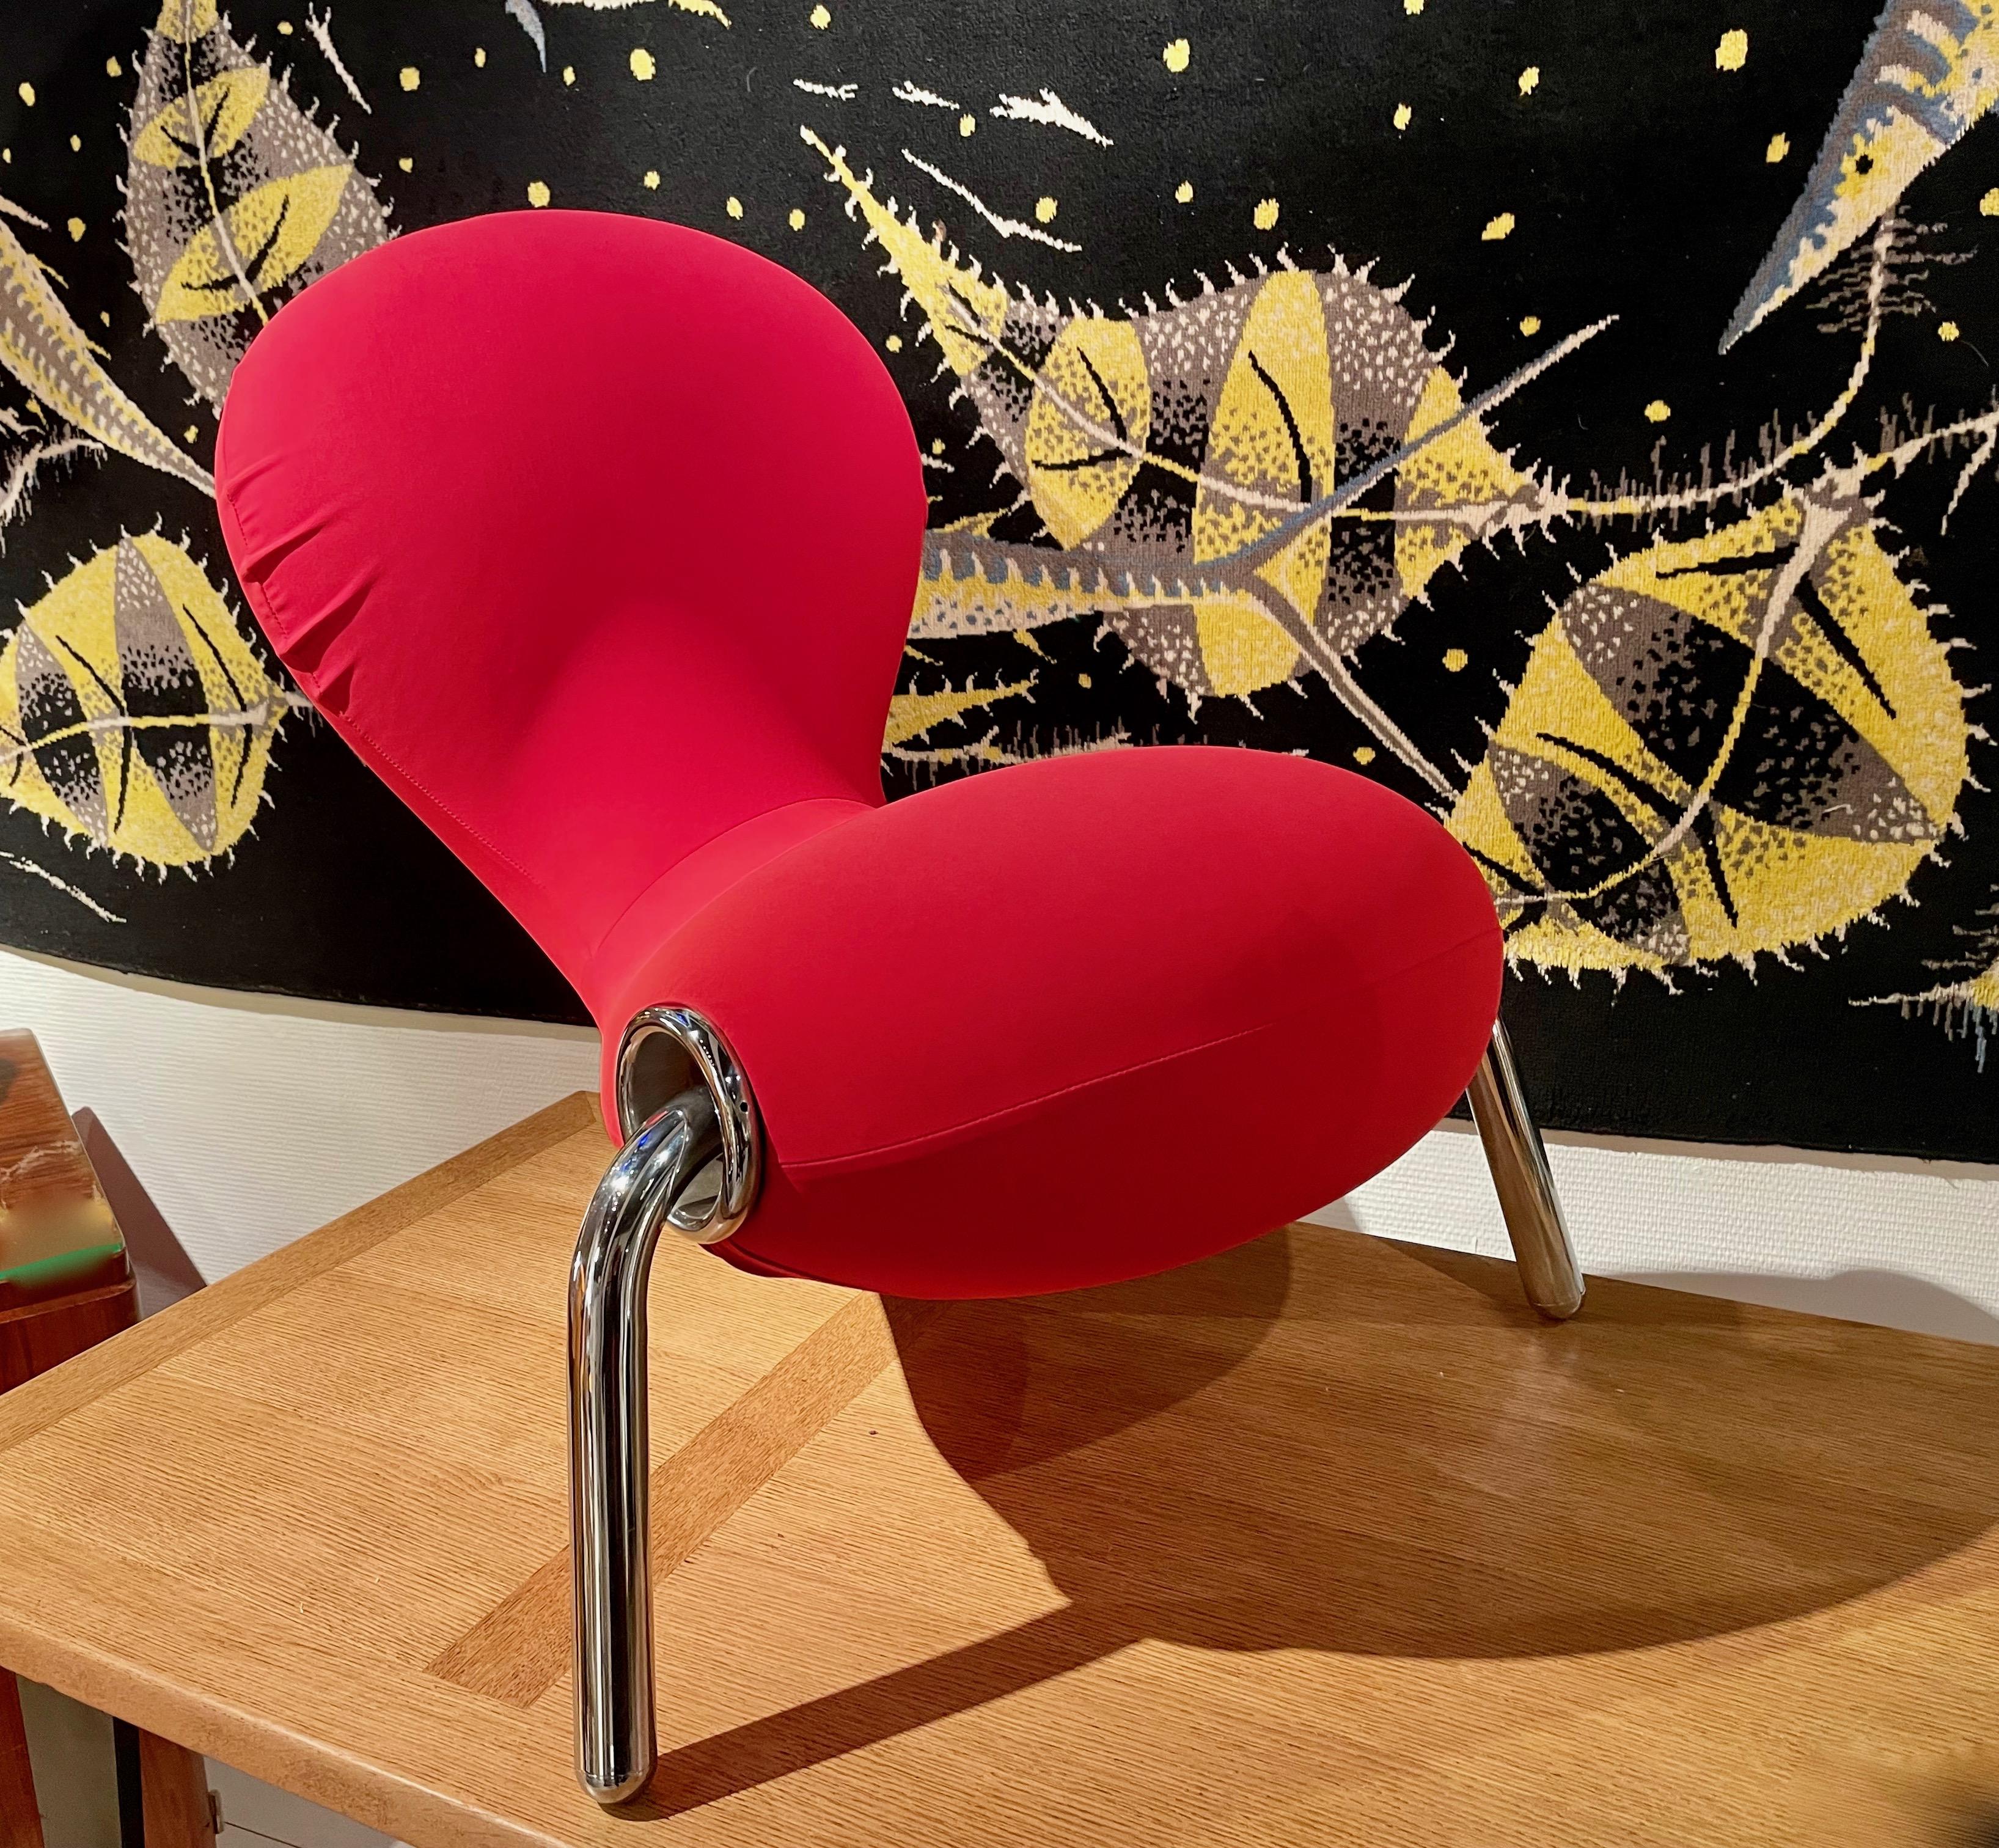 marc newson extruded chair